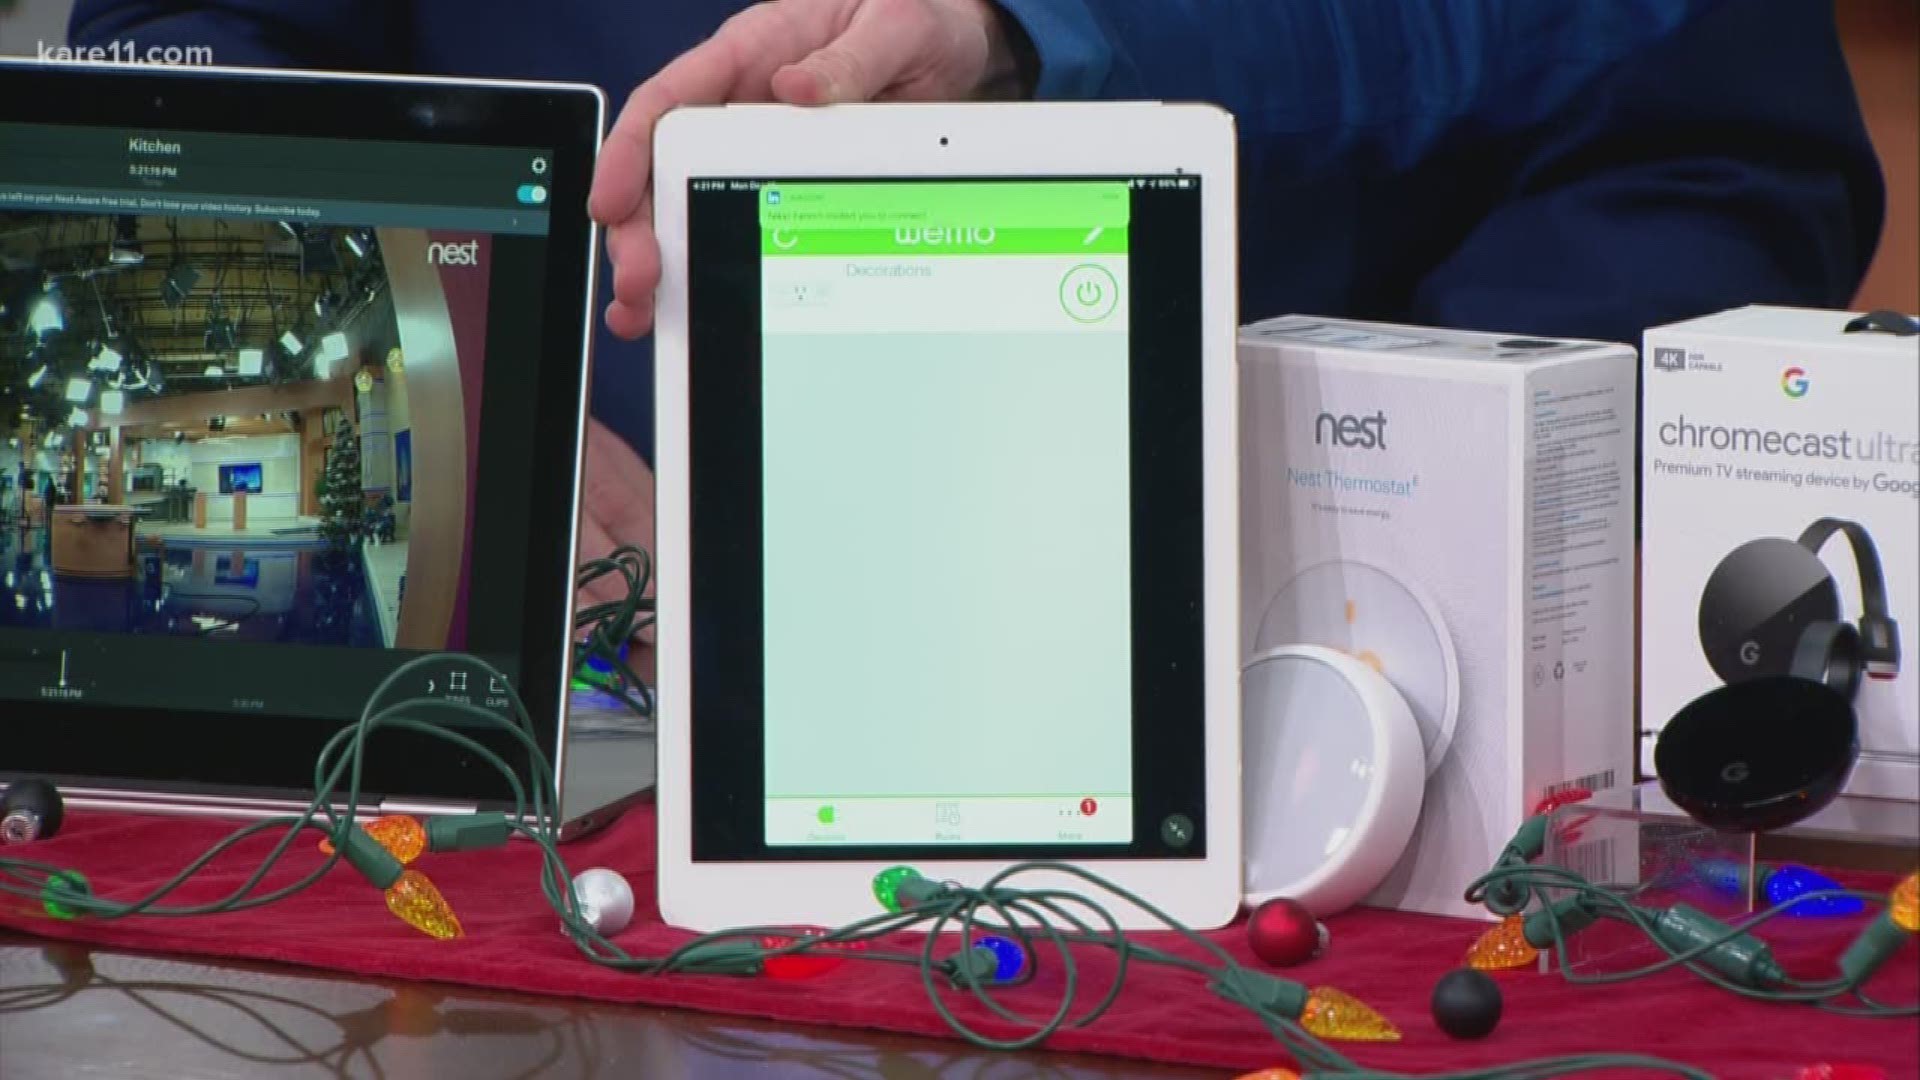 Verizon's Gadget Guy, Steve Van Dinter, stopped by KARE 11 to show us some of the most popular smart home products and how to tie them all together - and even control via voice.